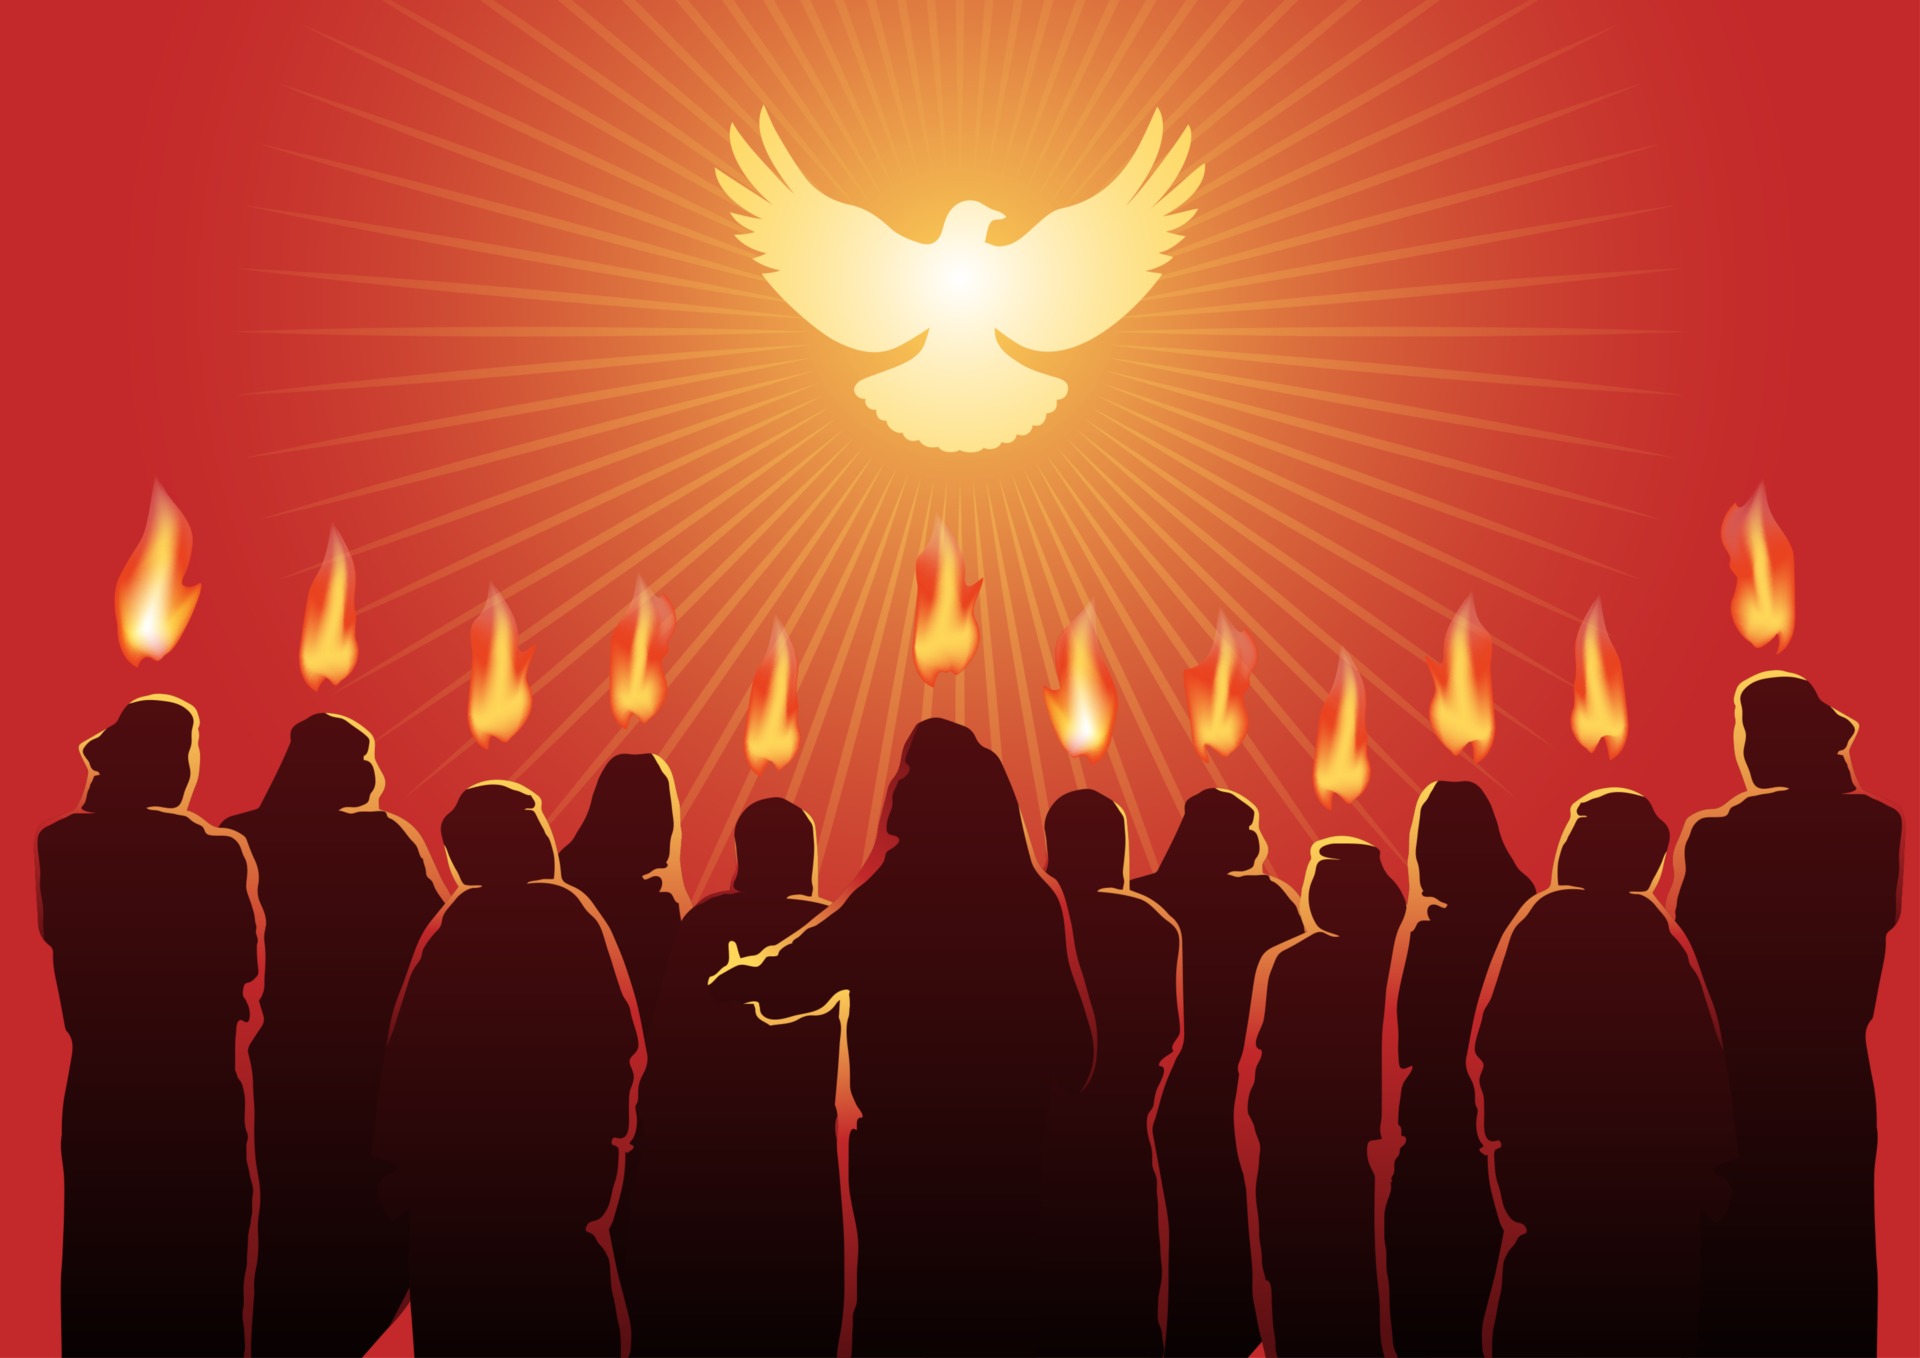 Today's Mass: The Holy Spirit is the Life of the Church